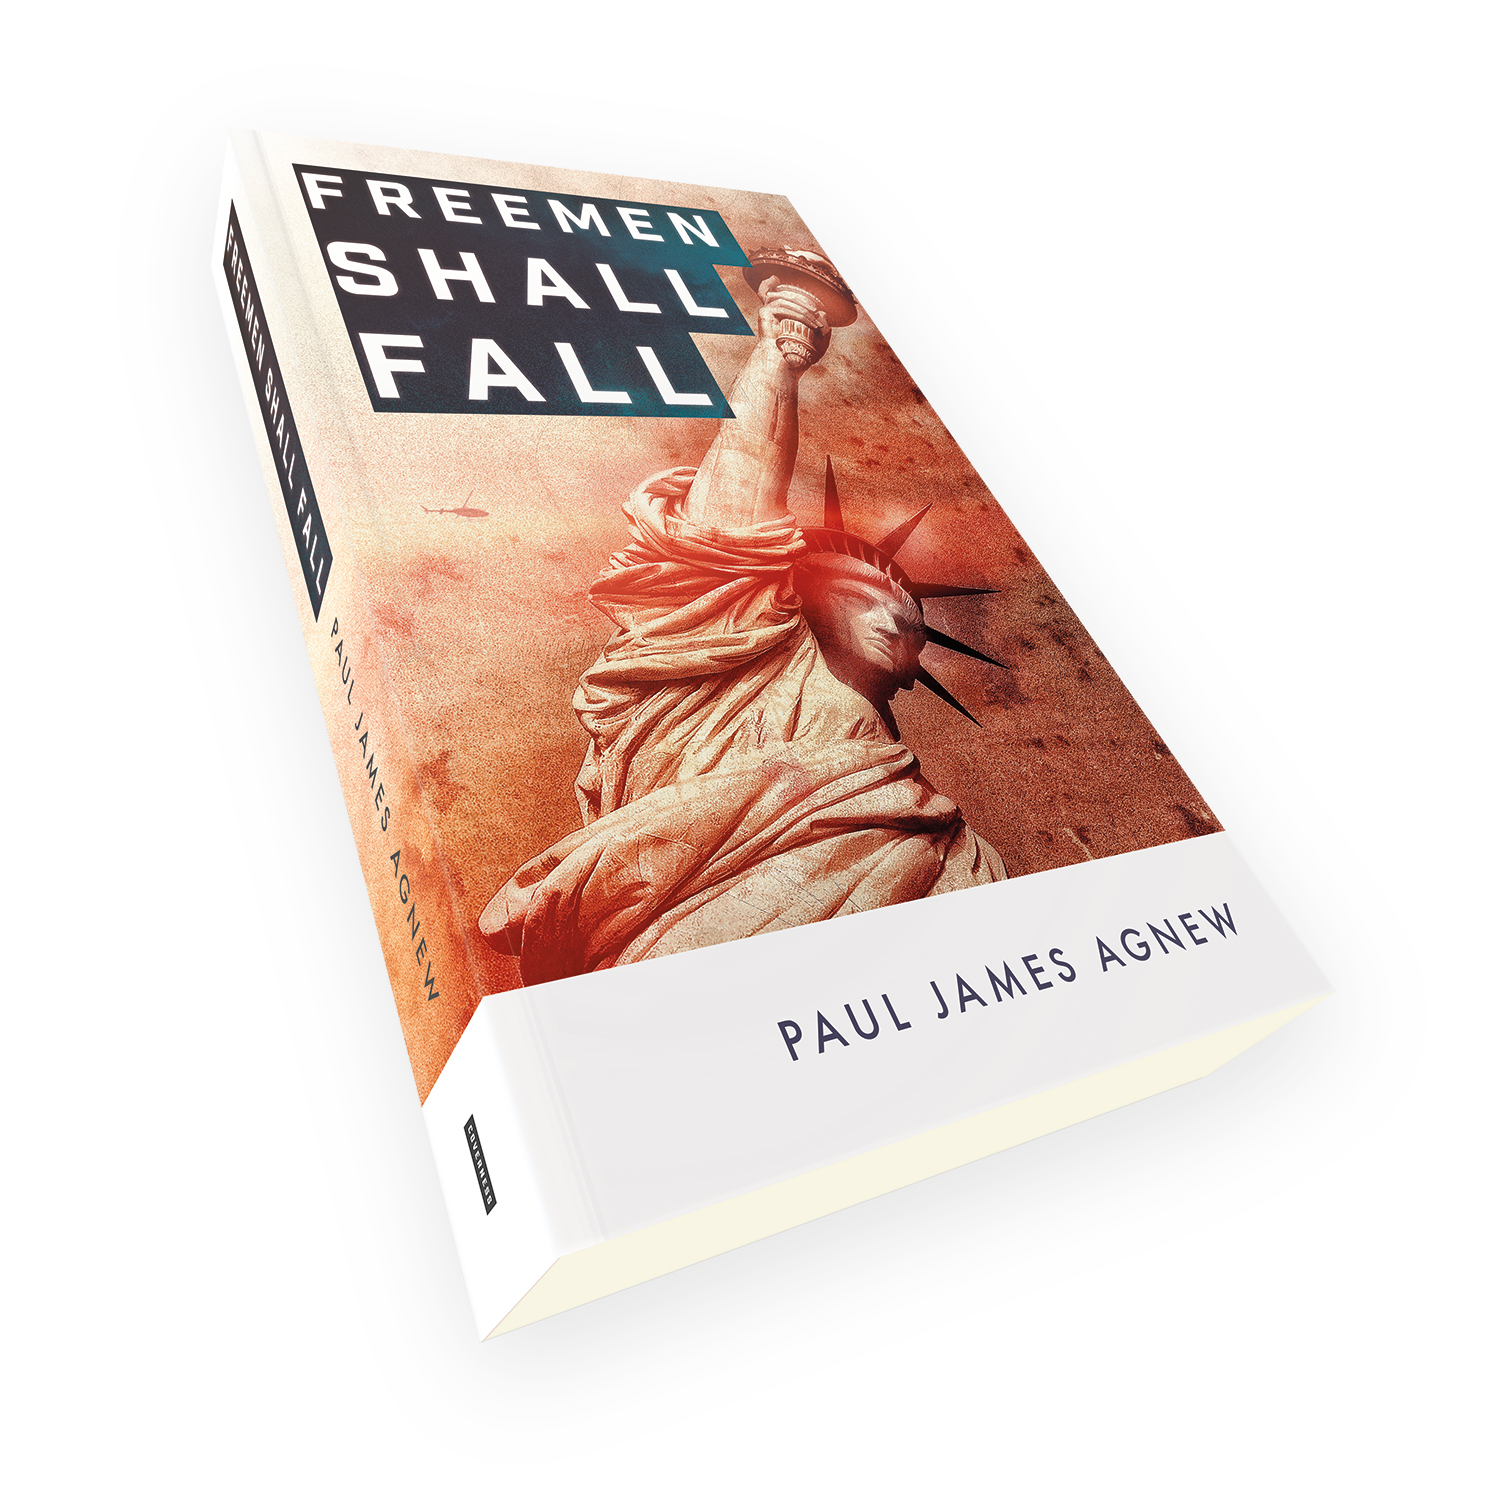 'Freemen Shall Fall' is a bespoke cover design for a topical modern political thriller. The book cover was designed by Mark Thomas, of coverness.com. To find out more about my book design services, please visit www.coverness.com.